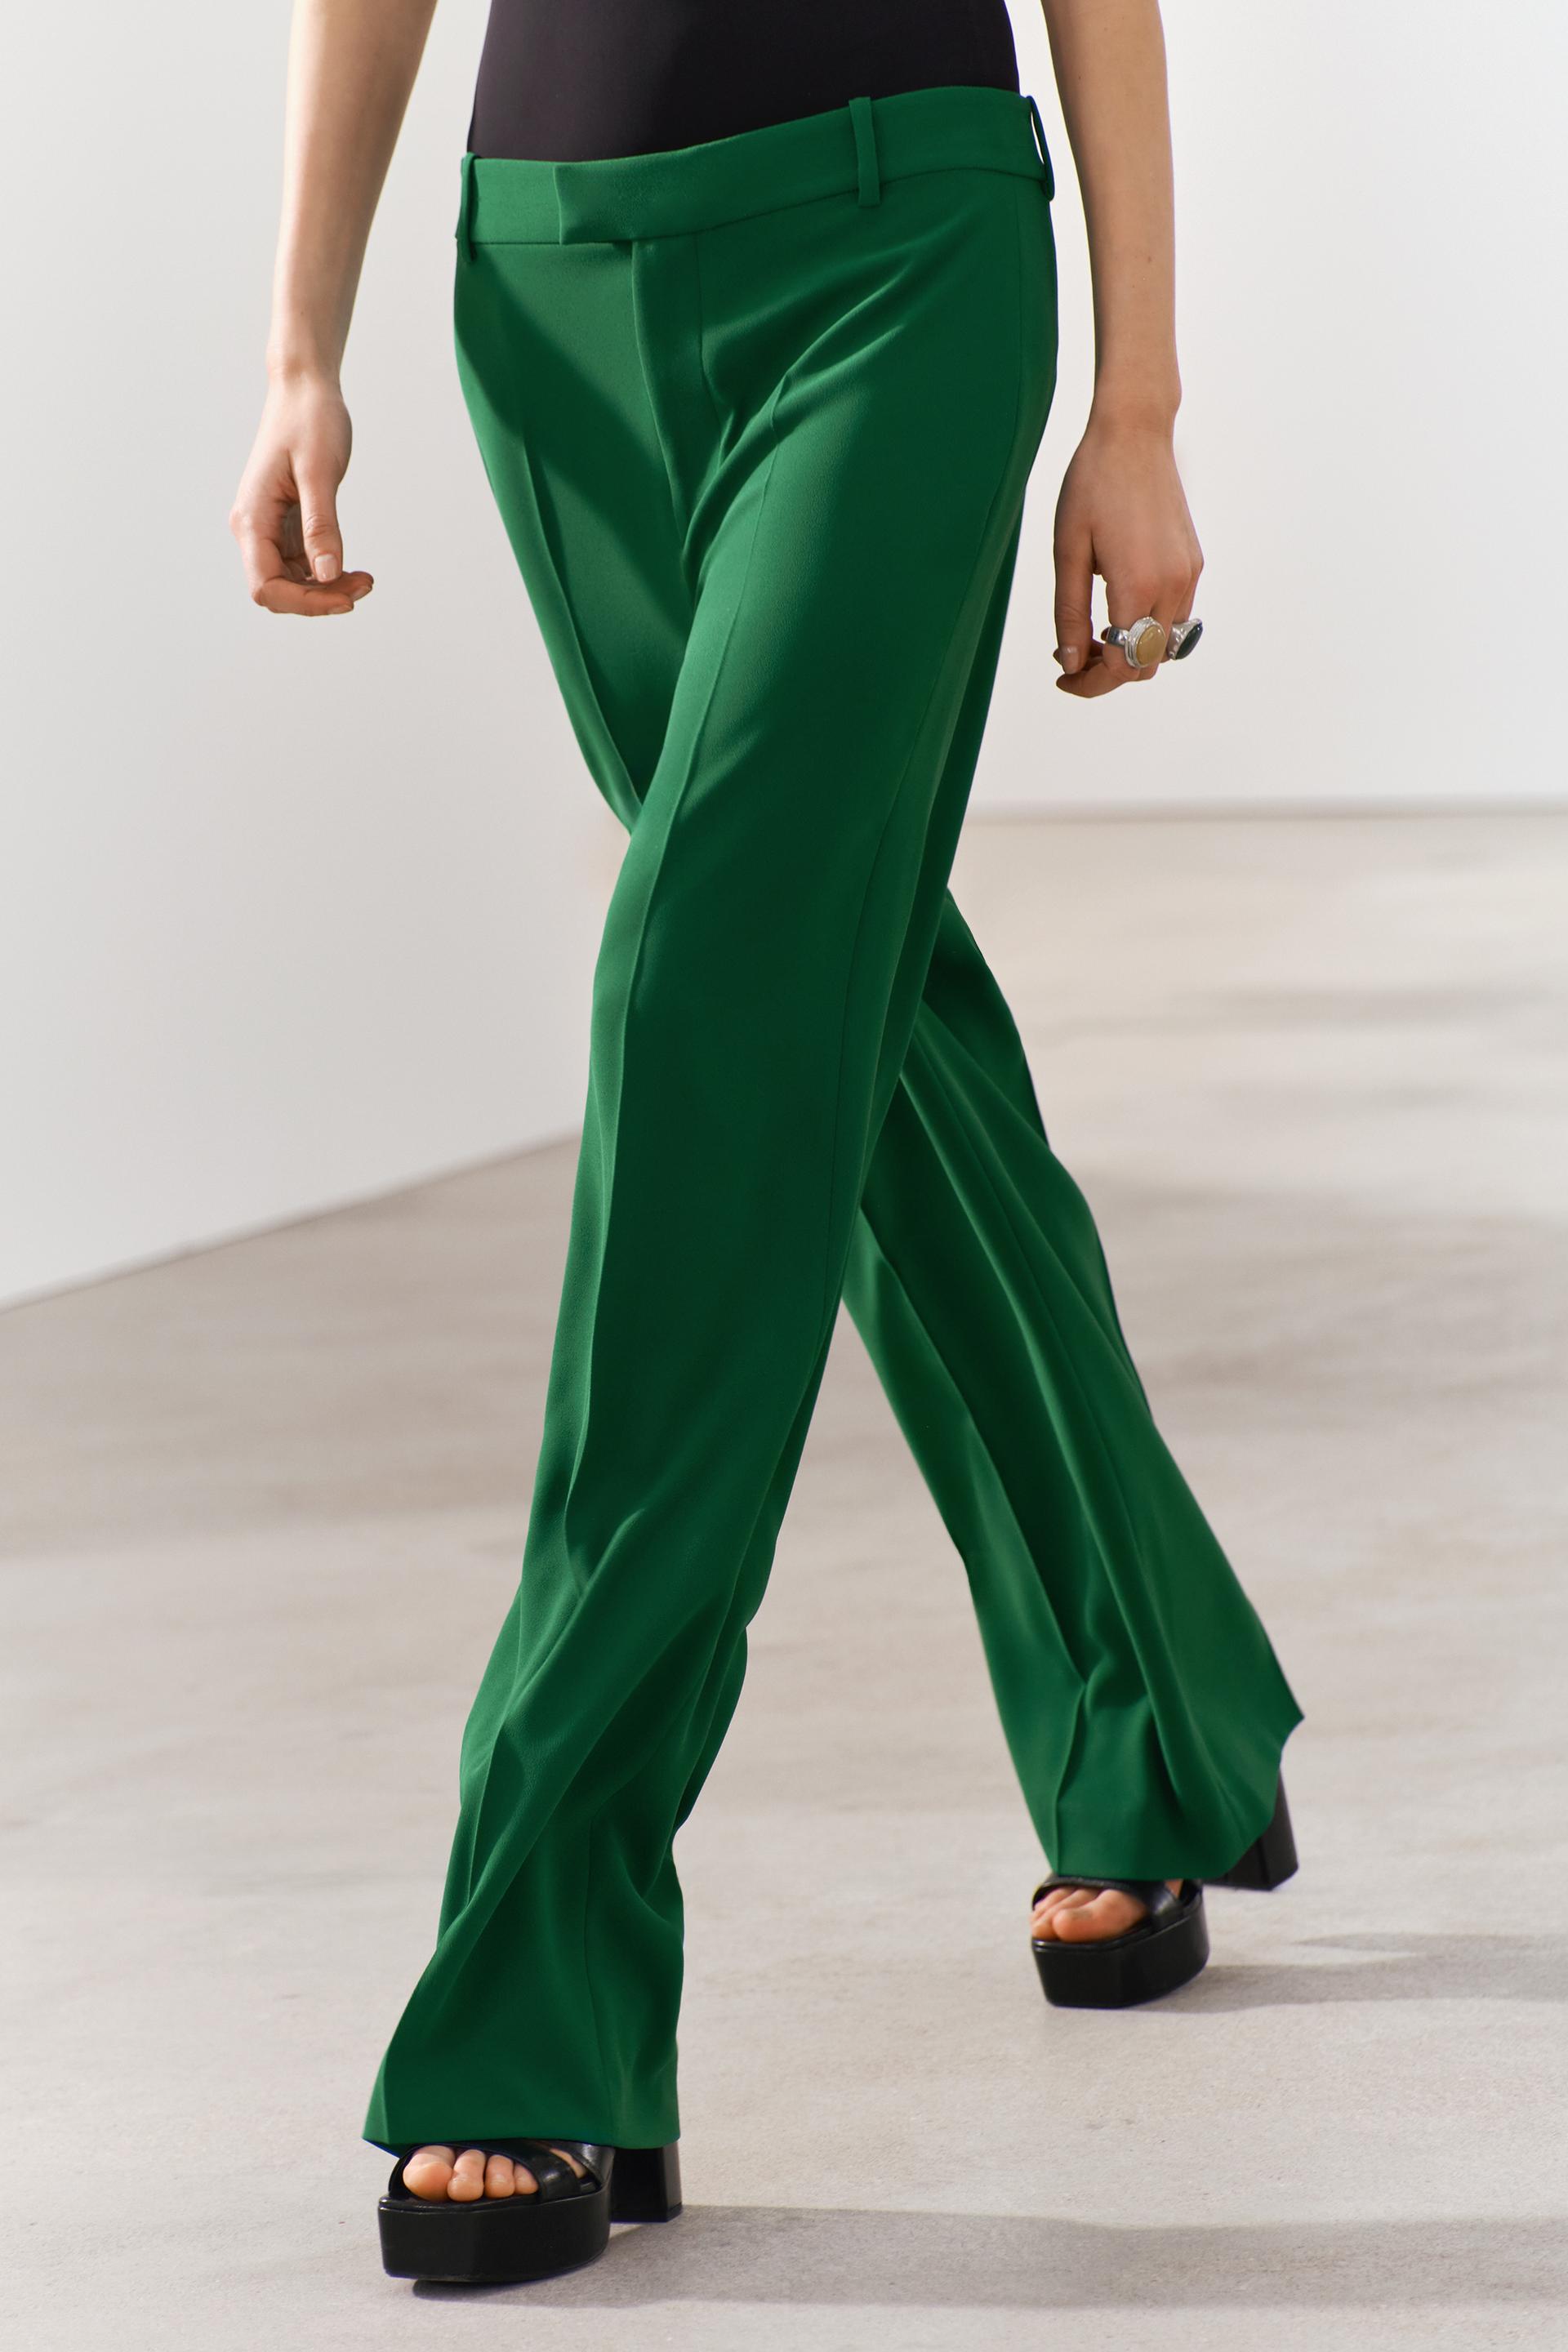 ZARA High Waisted Mint Green Tailored Pants Size M - $45 (30% Off Retail)  New With Tags - From Abby